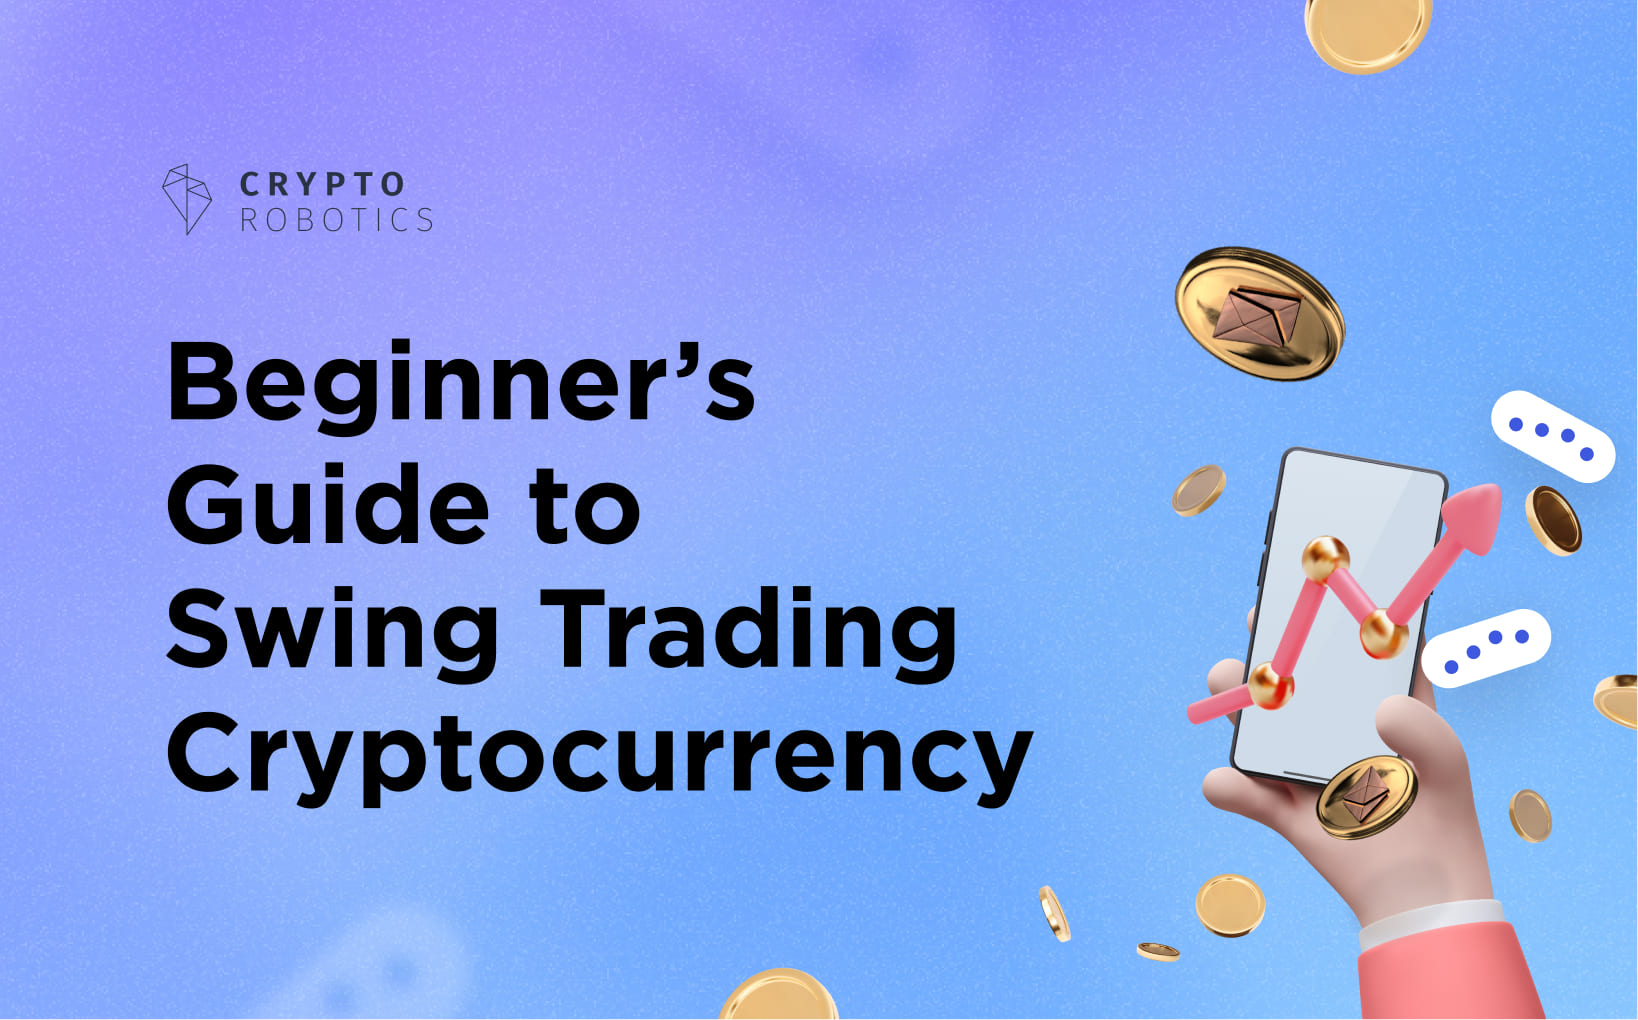 Swing trading cryptocurrencies